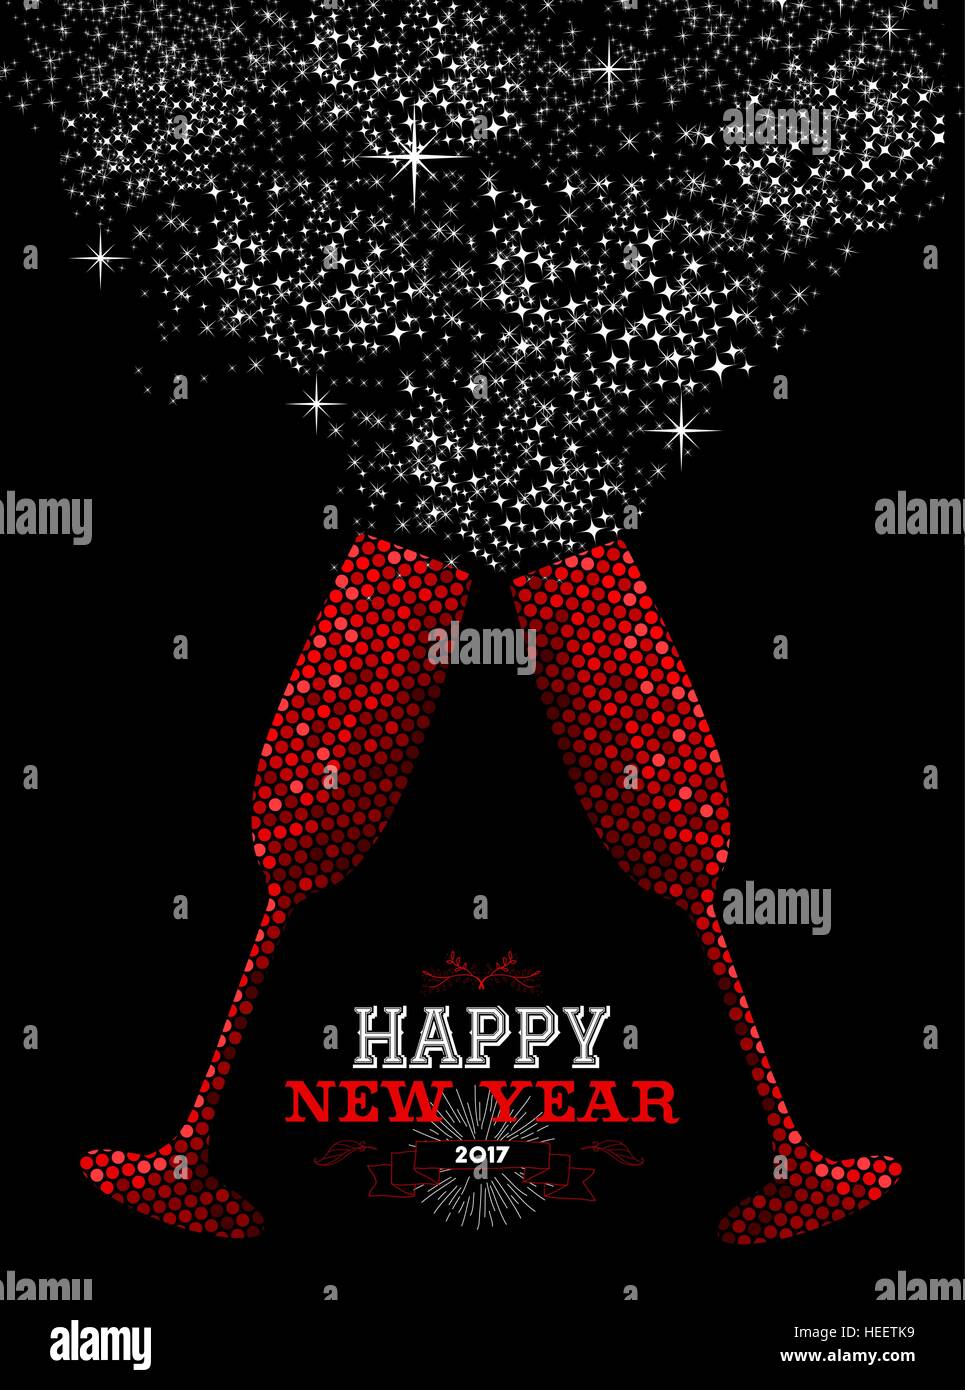 Happy New Year 2017 luxury red celebration toast in mosaic style. Ideal for holiday card or elegant party invitation. EPS10 vector. Stock Vector